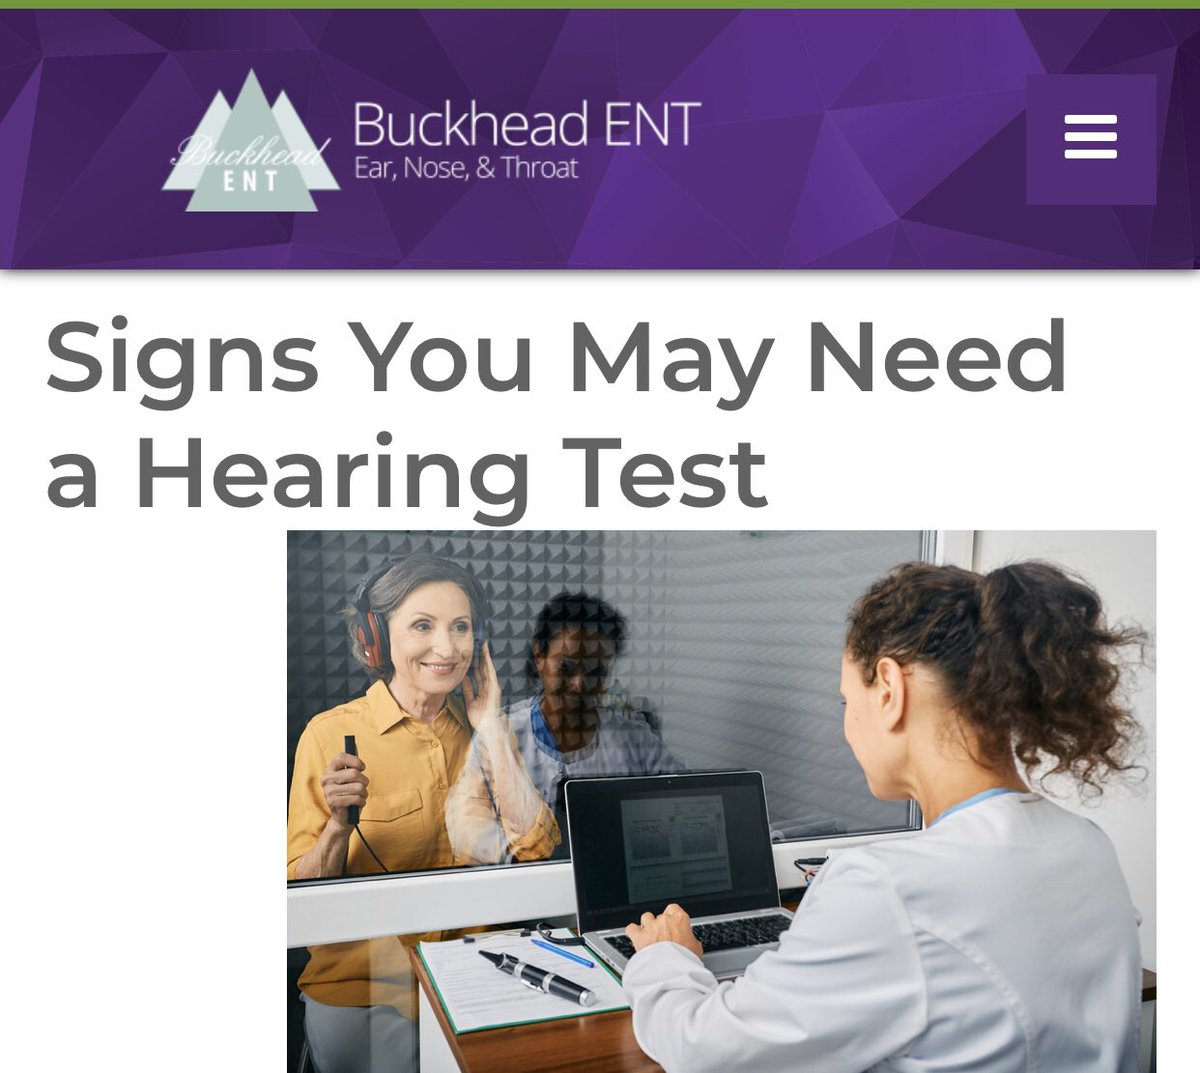 #HearingHealth #HearingCheck #HearingTest #Hearing - Are you frequently asking people to repeat themselves? - Are there misunderstandings at work or at home causing disagreements? Let us check your hearing at BuckheadENT.com